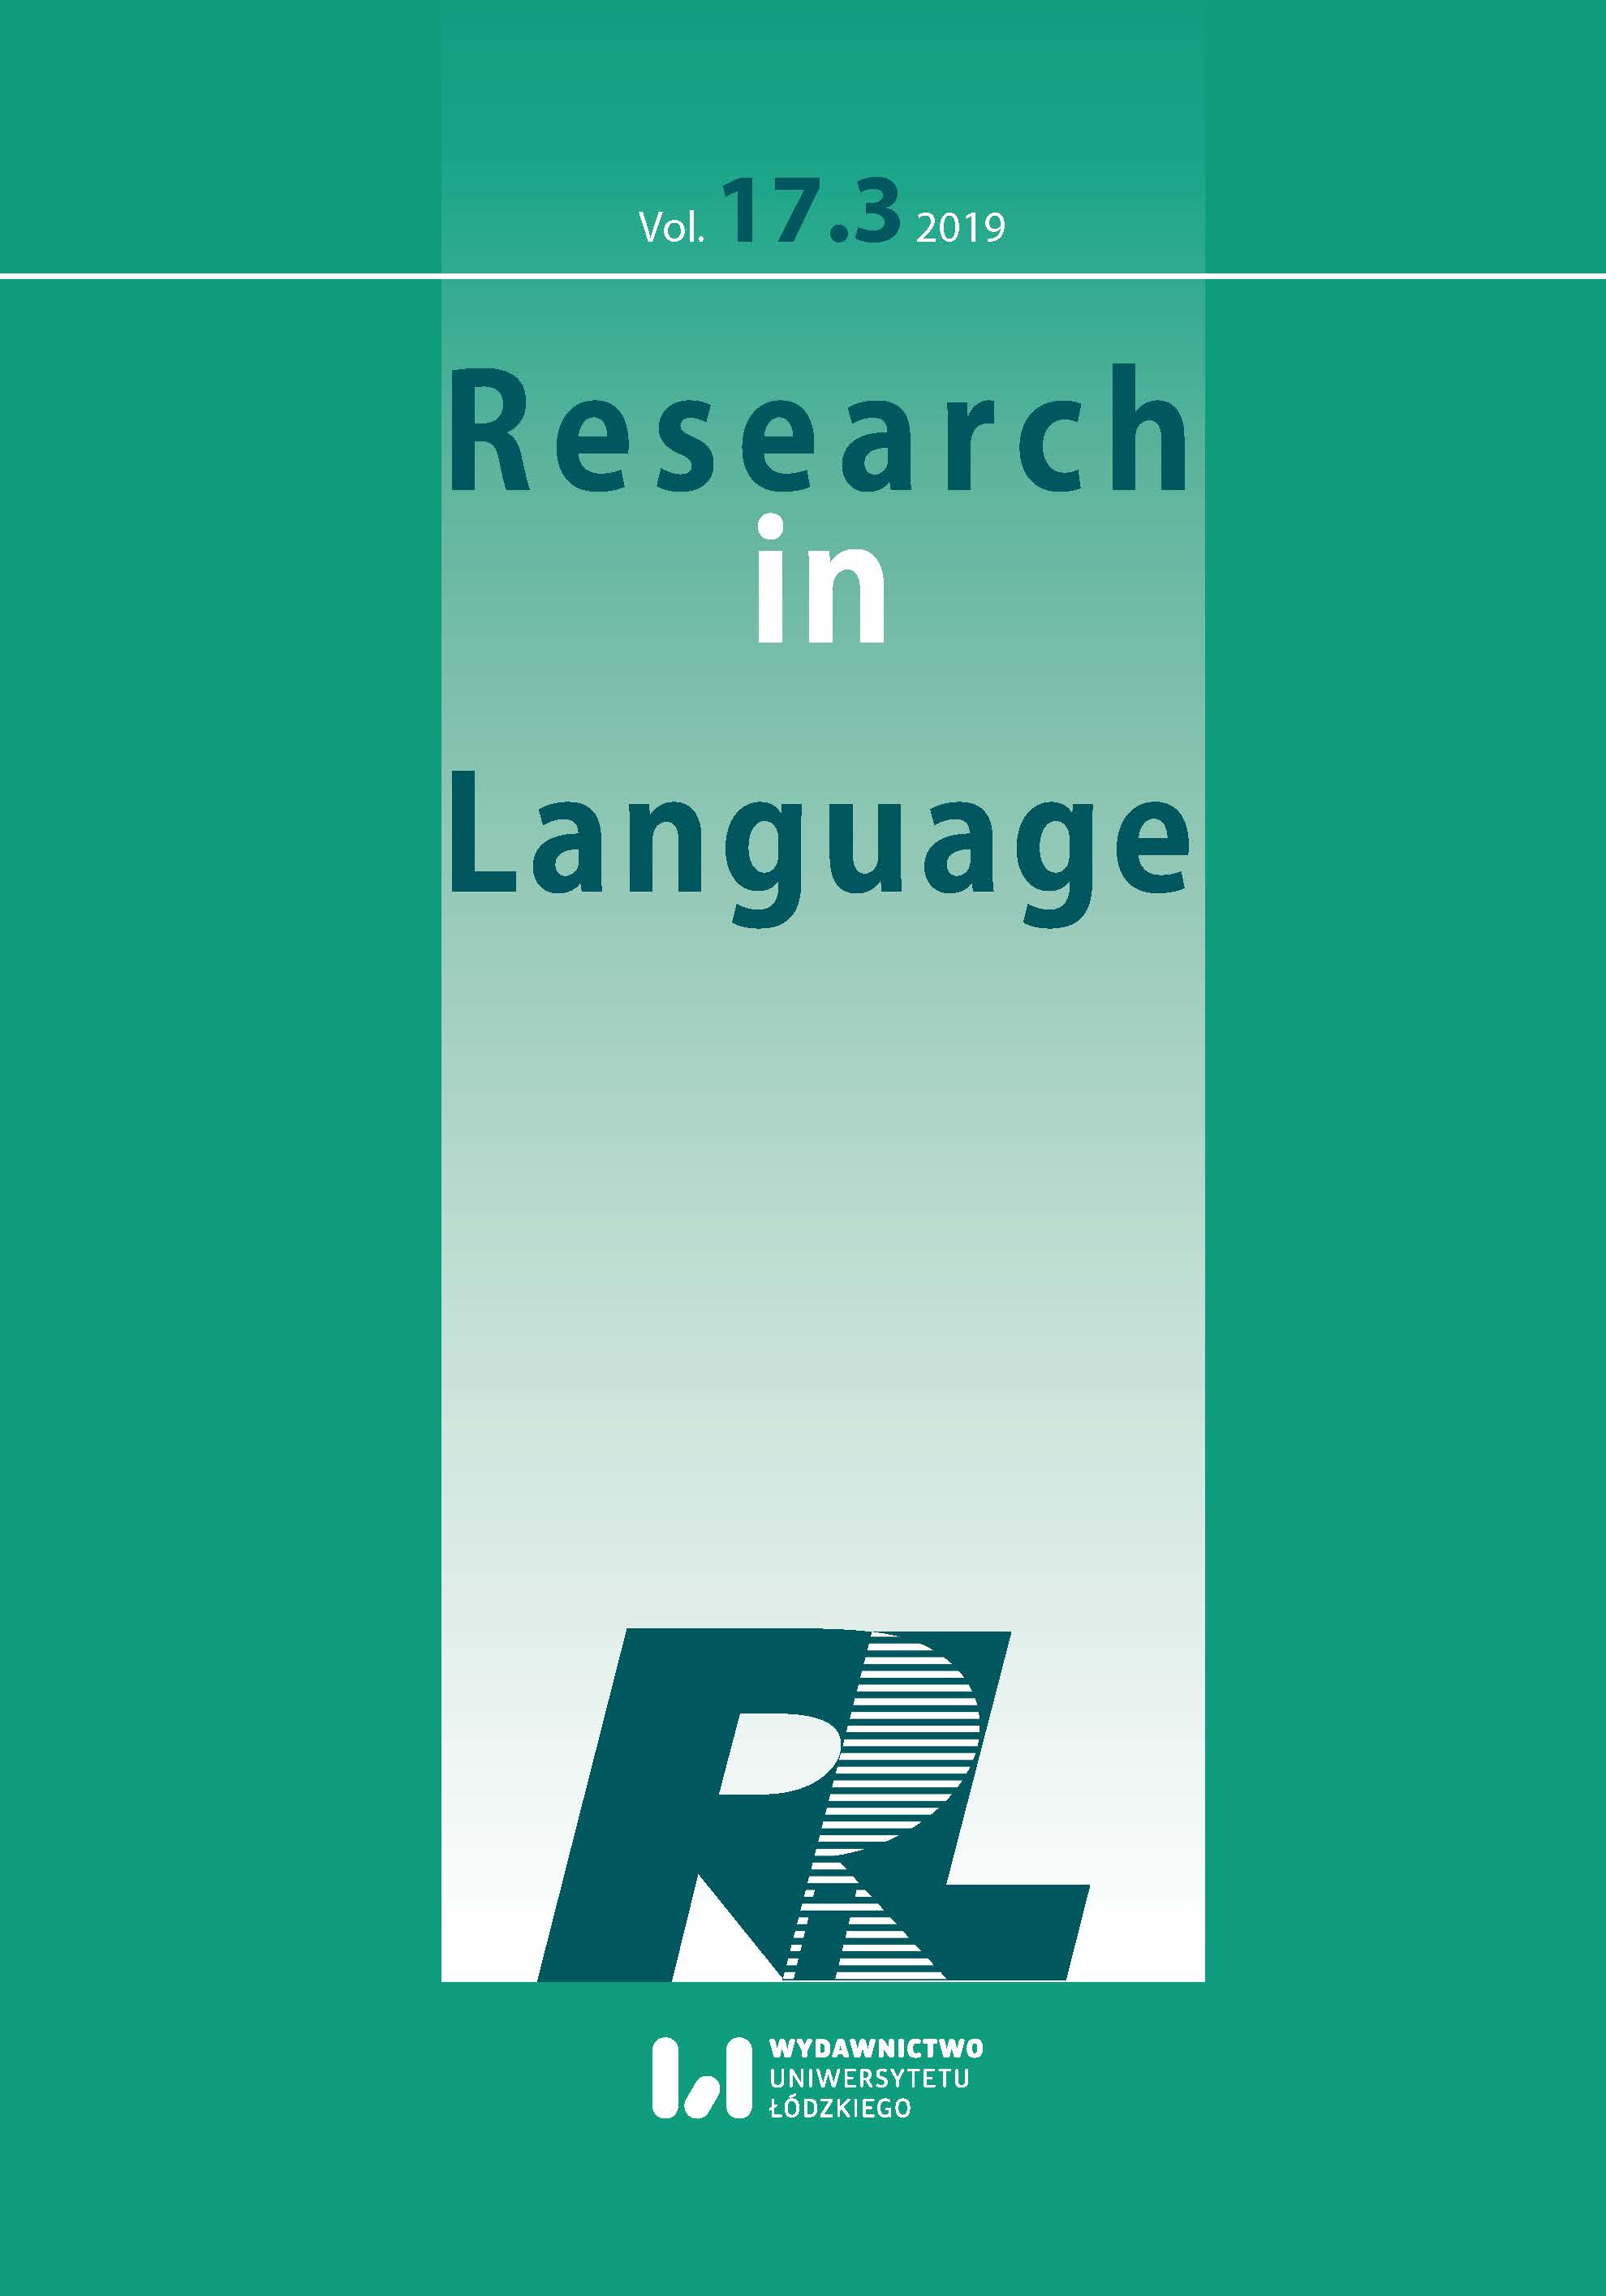 Vowel Perception and Transcription Trainer for Learners of English as a Foreign Language